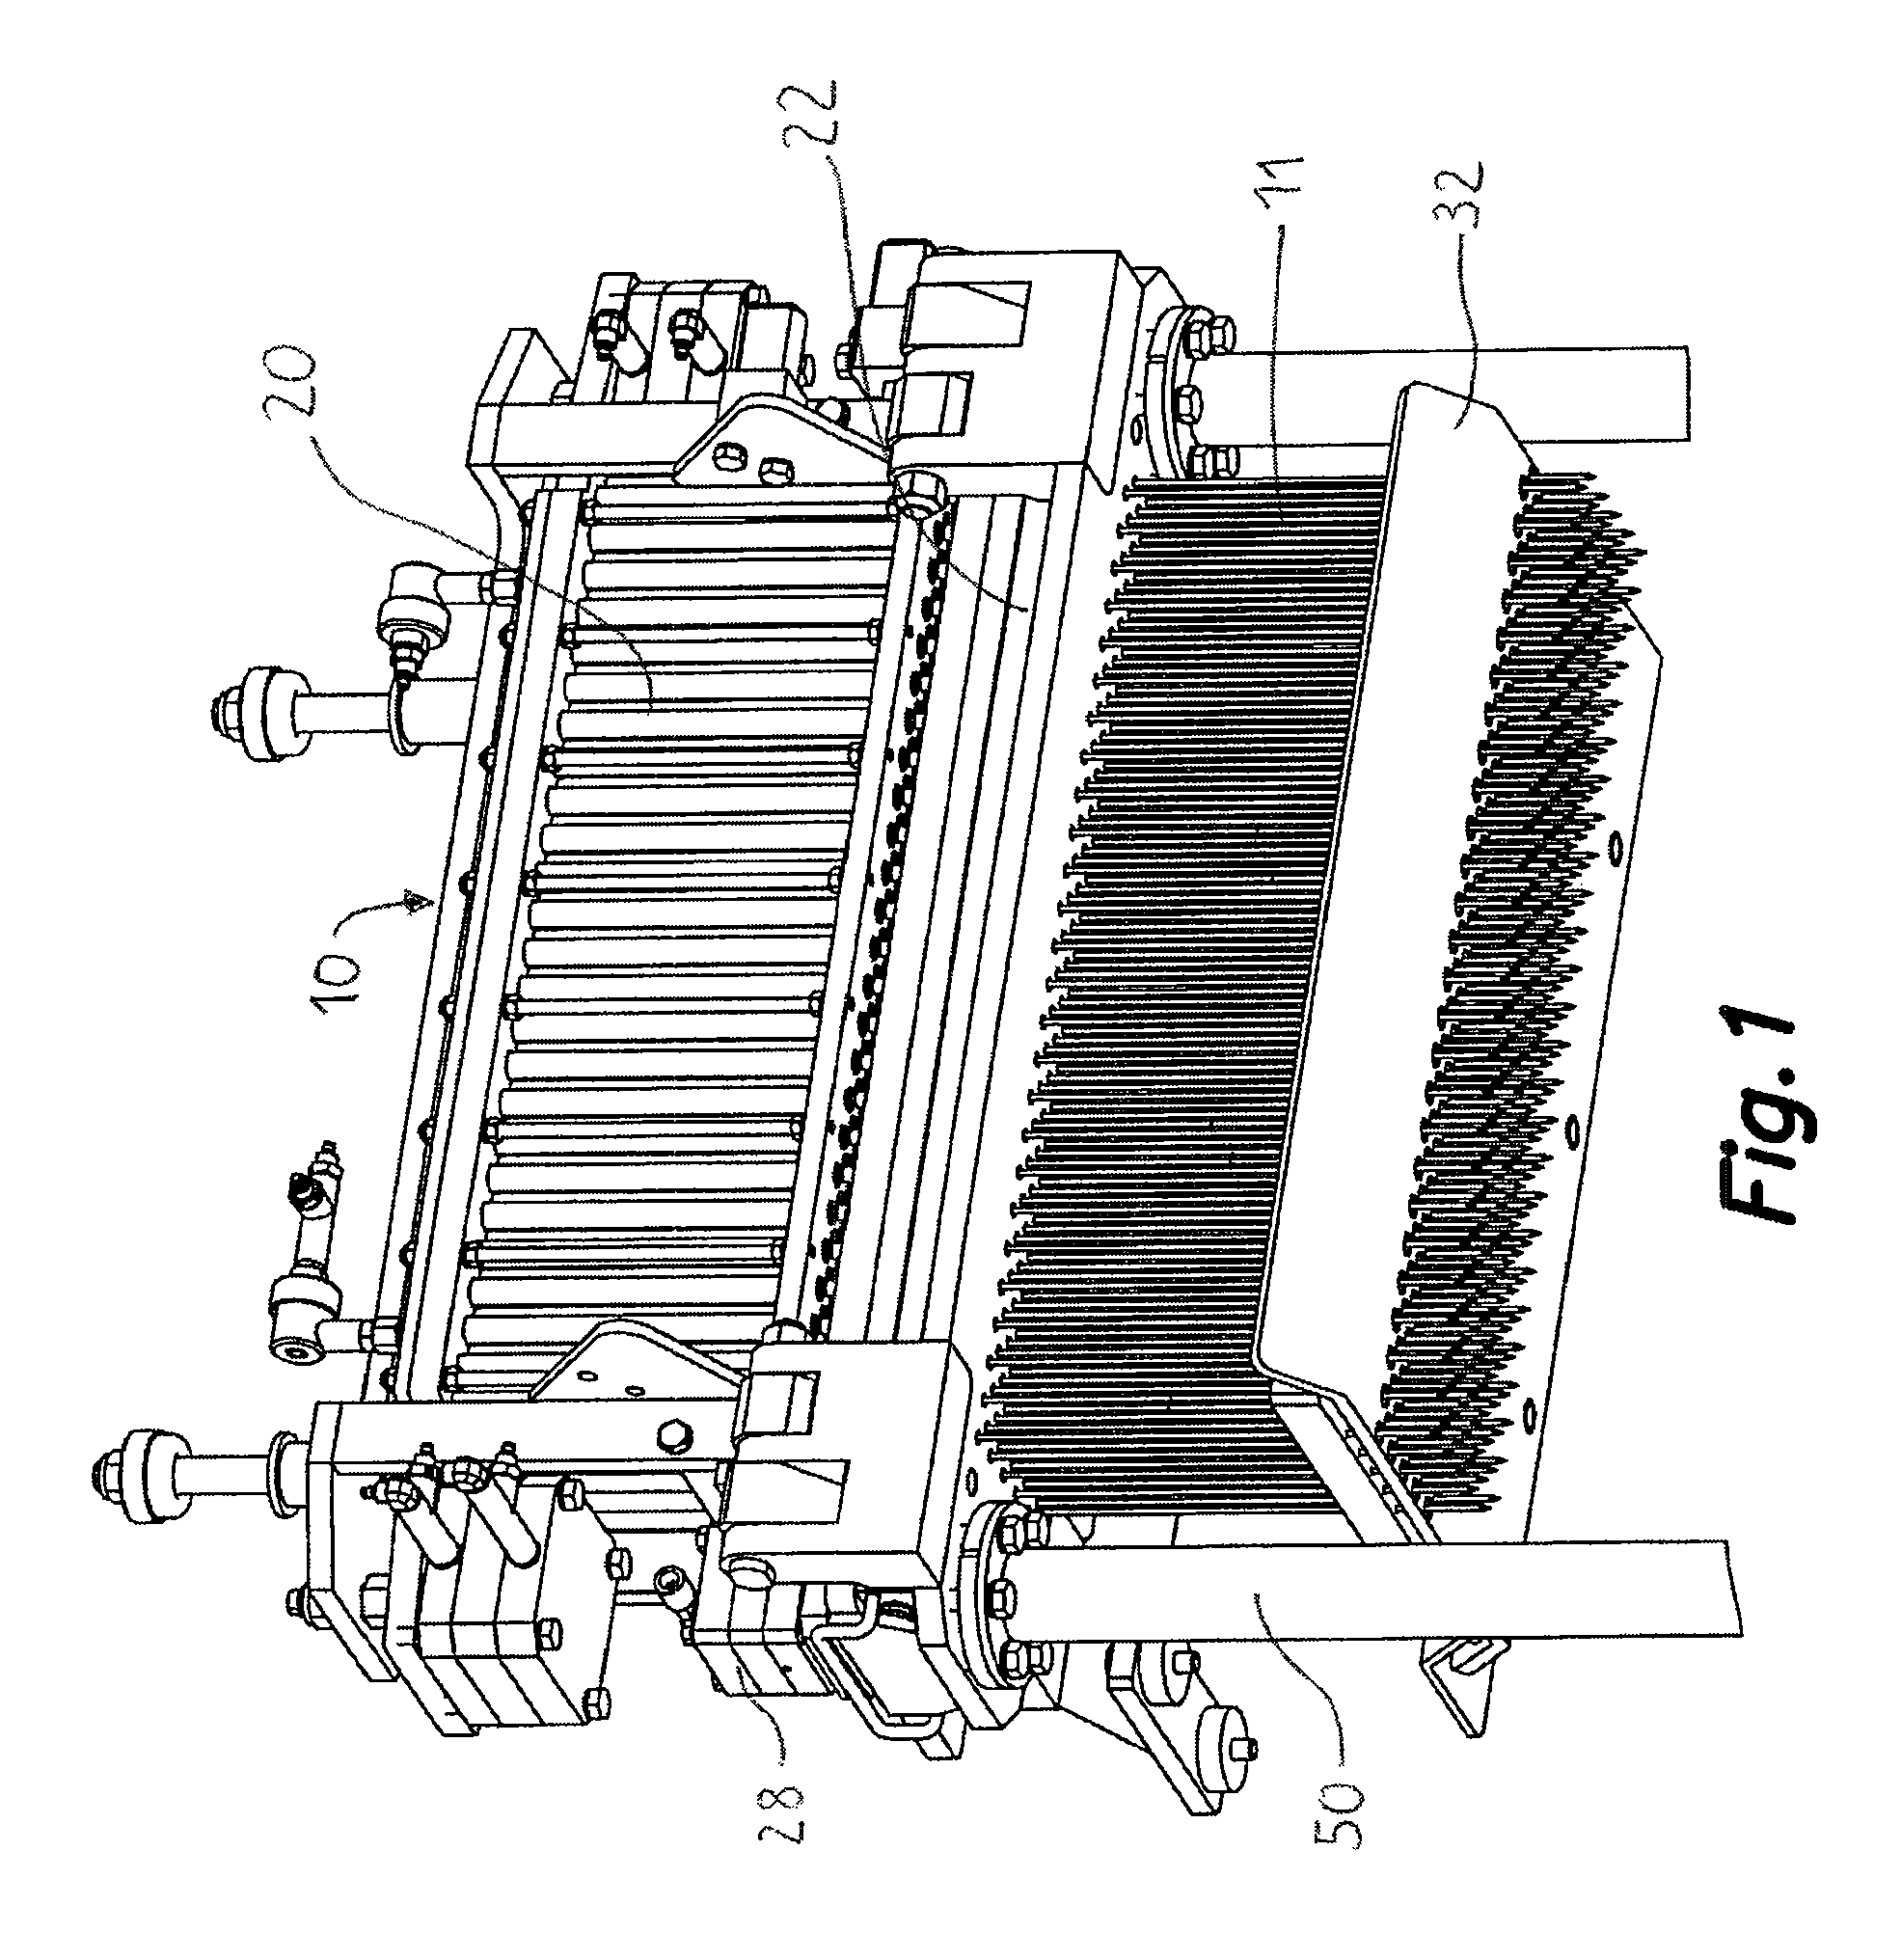 Machine for injecting fluids into meat or fish products